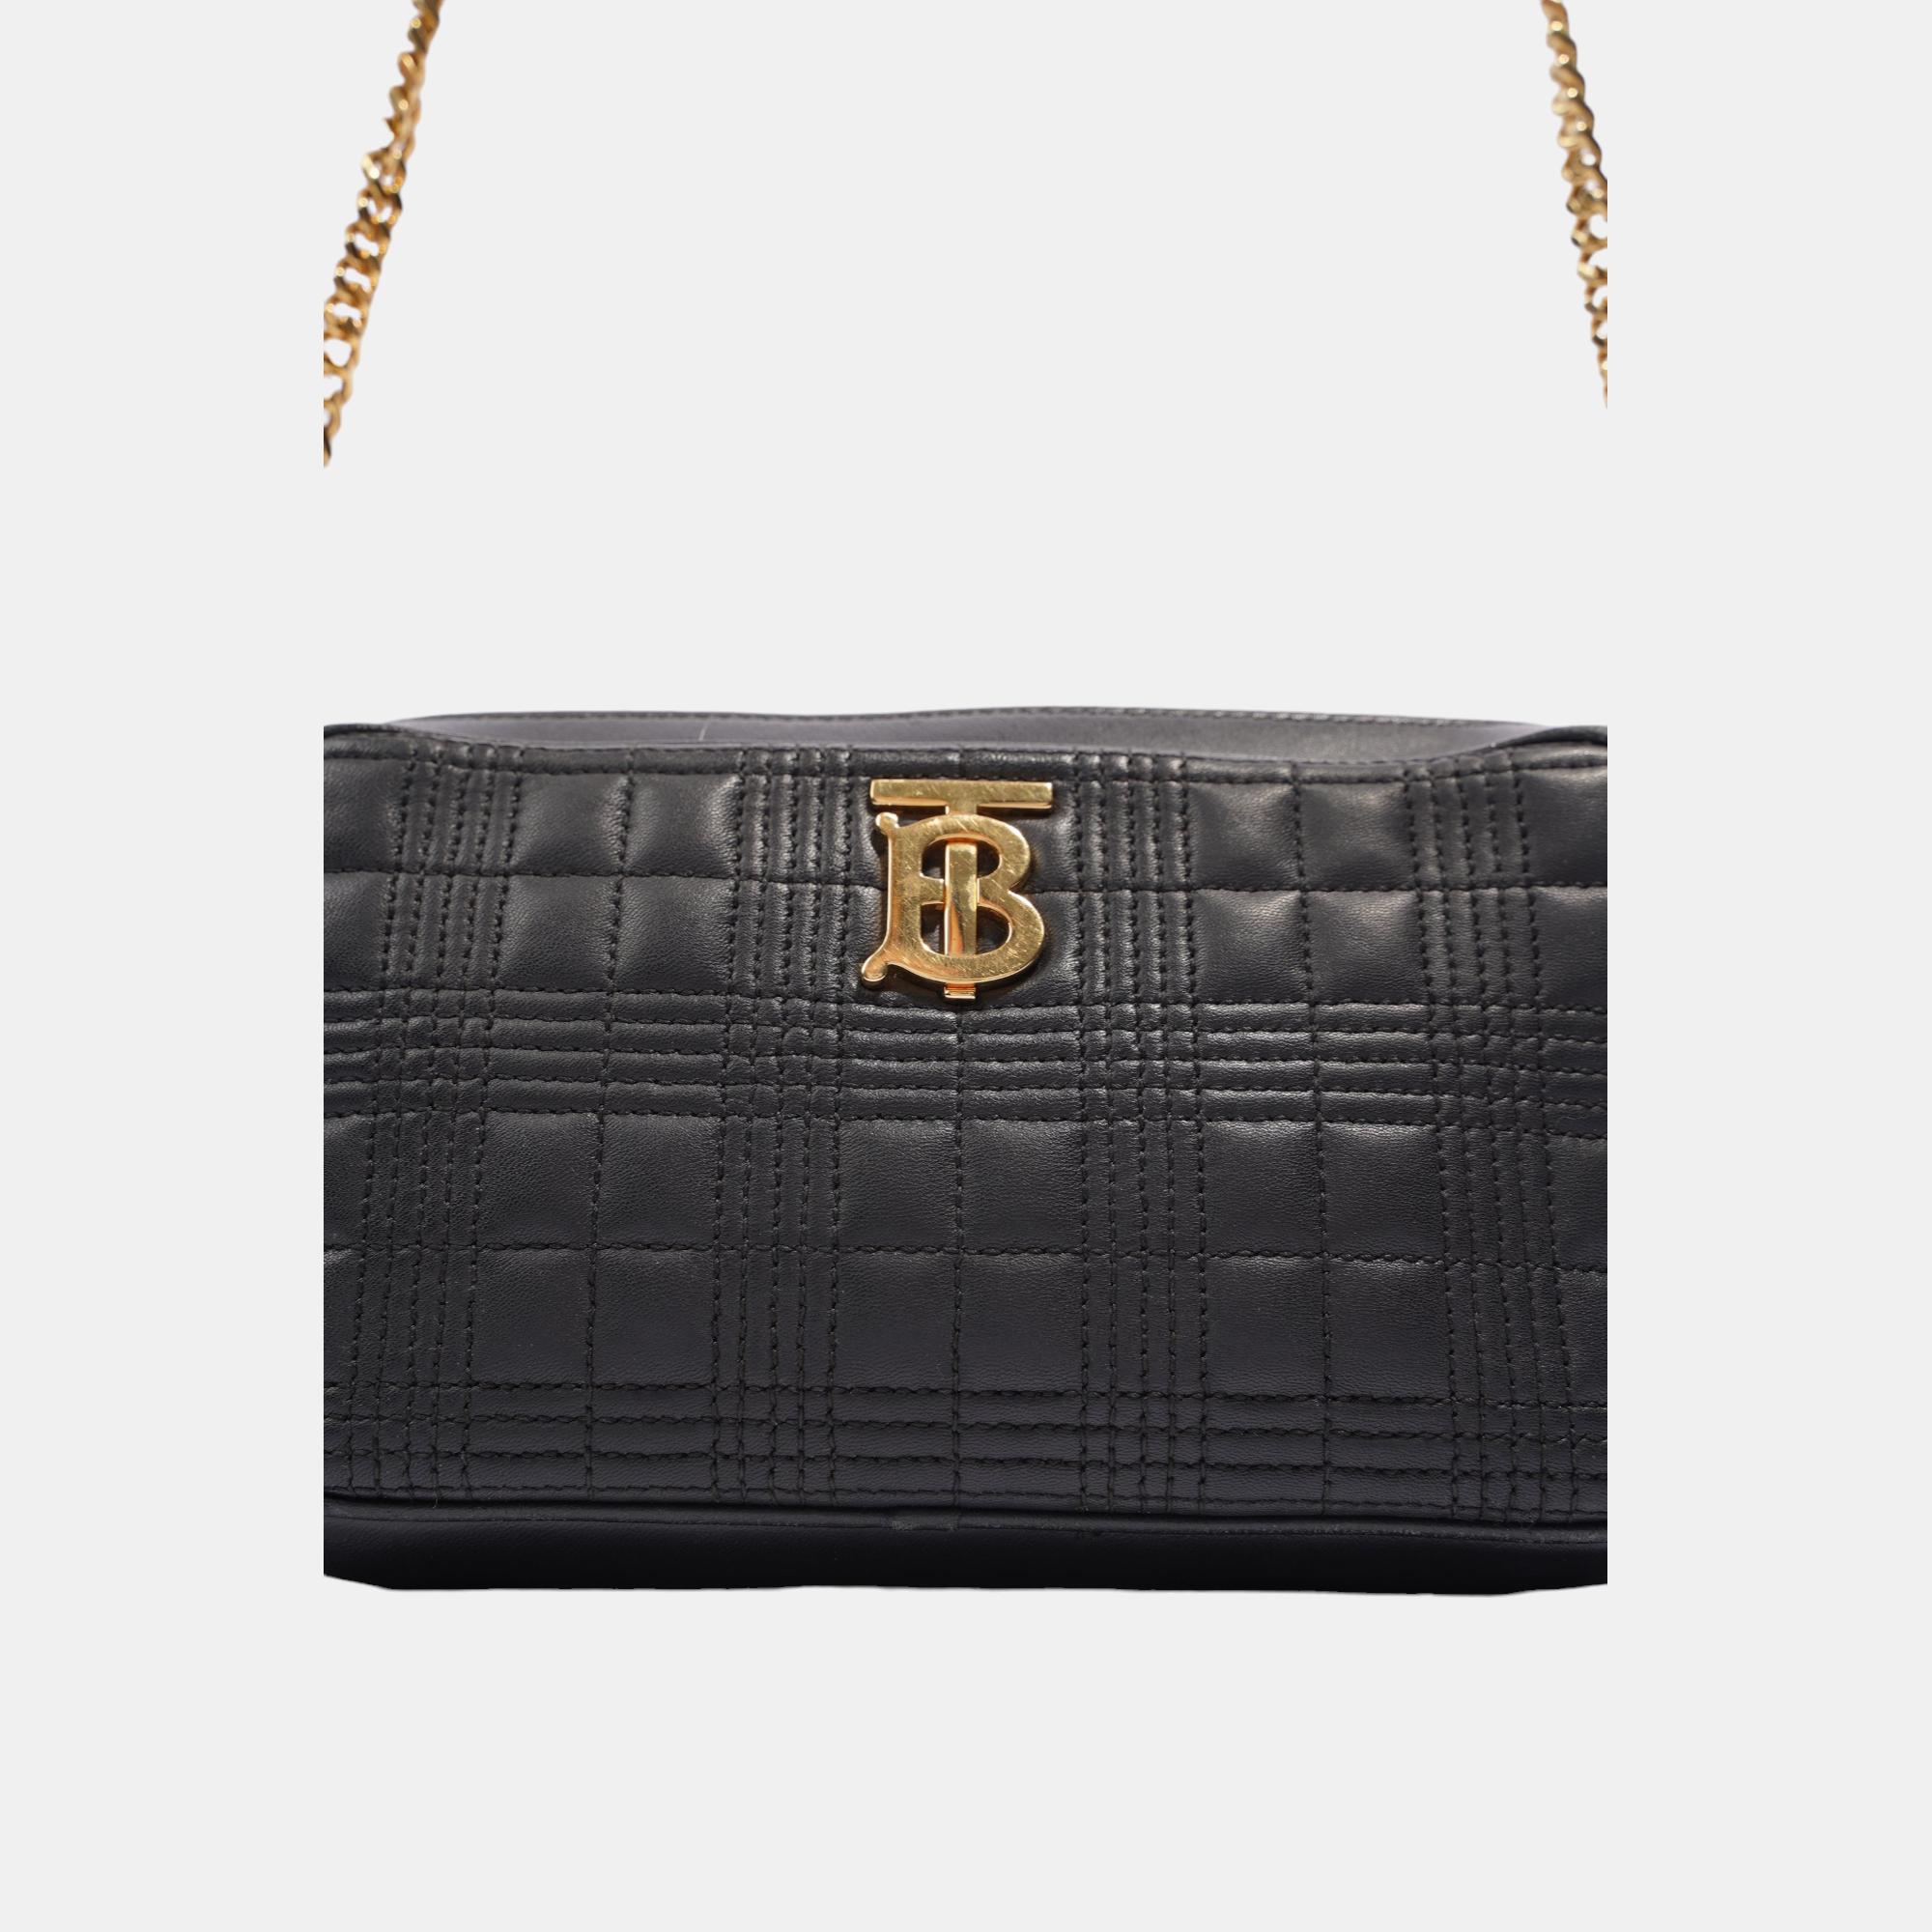 Burberry Chain Camera Quilted Bag Black Leather